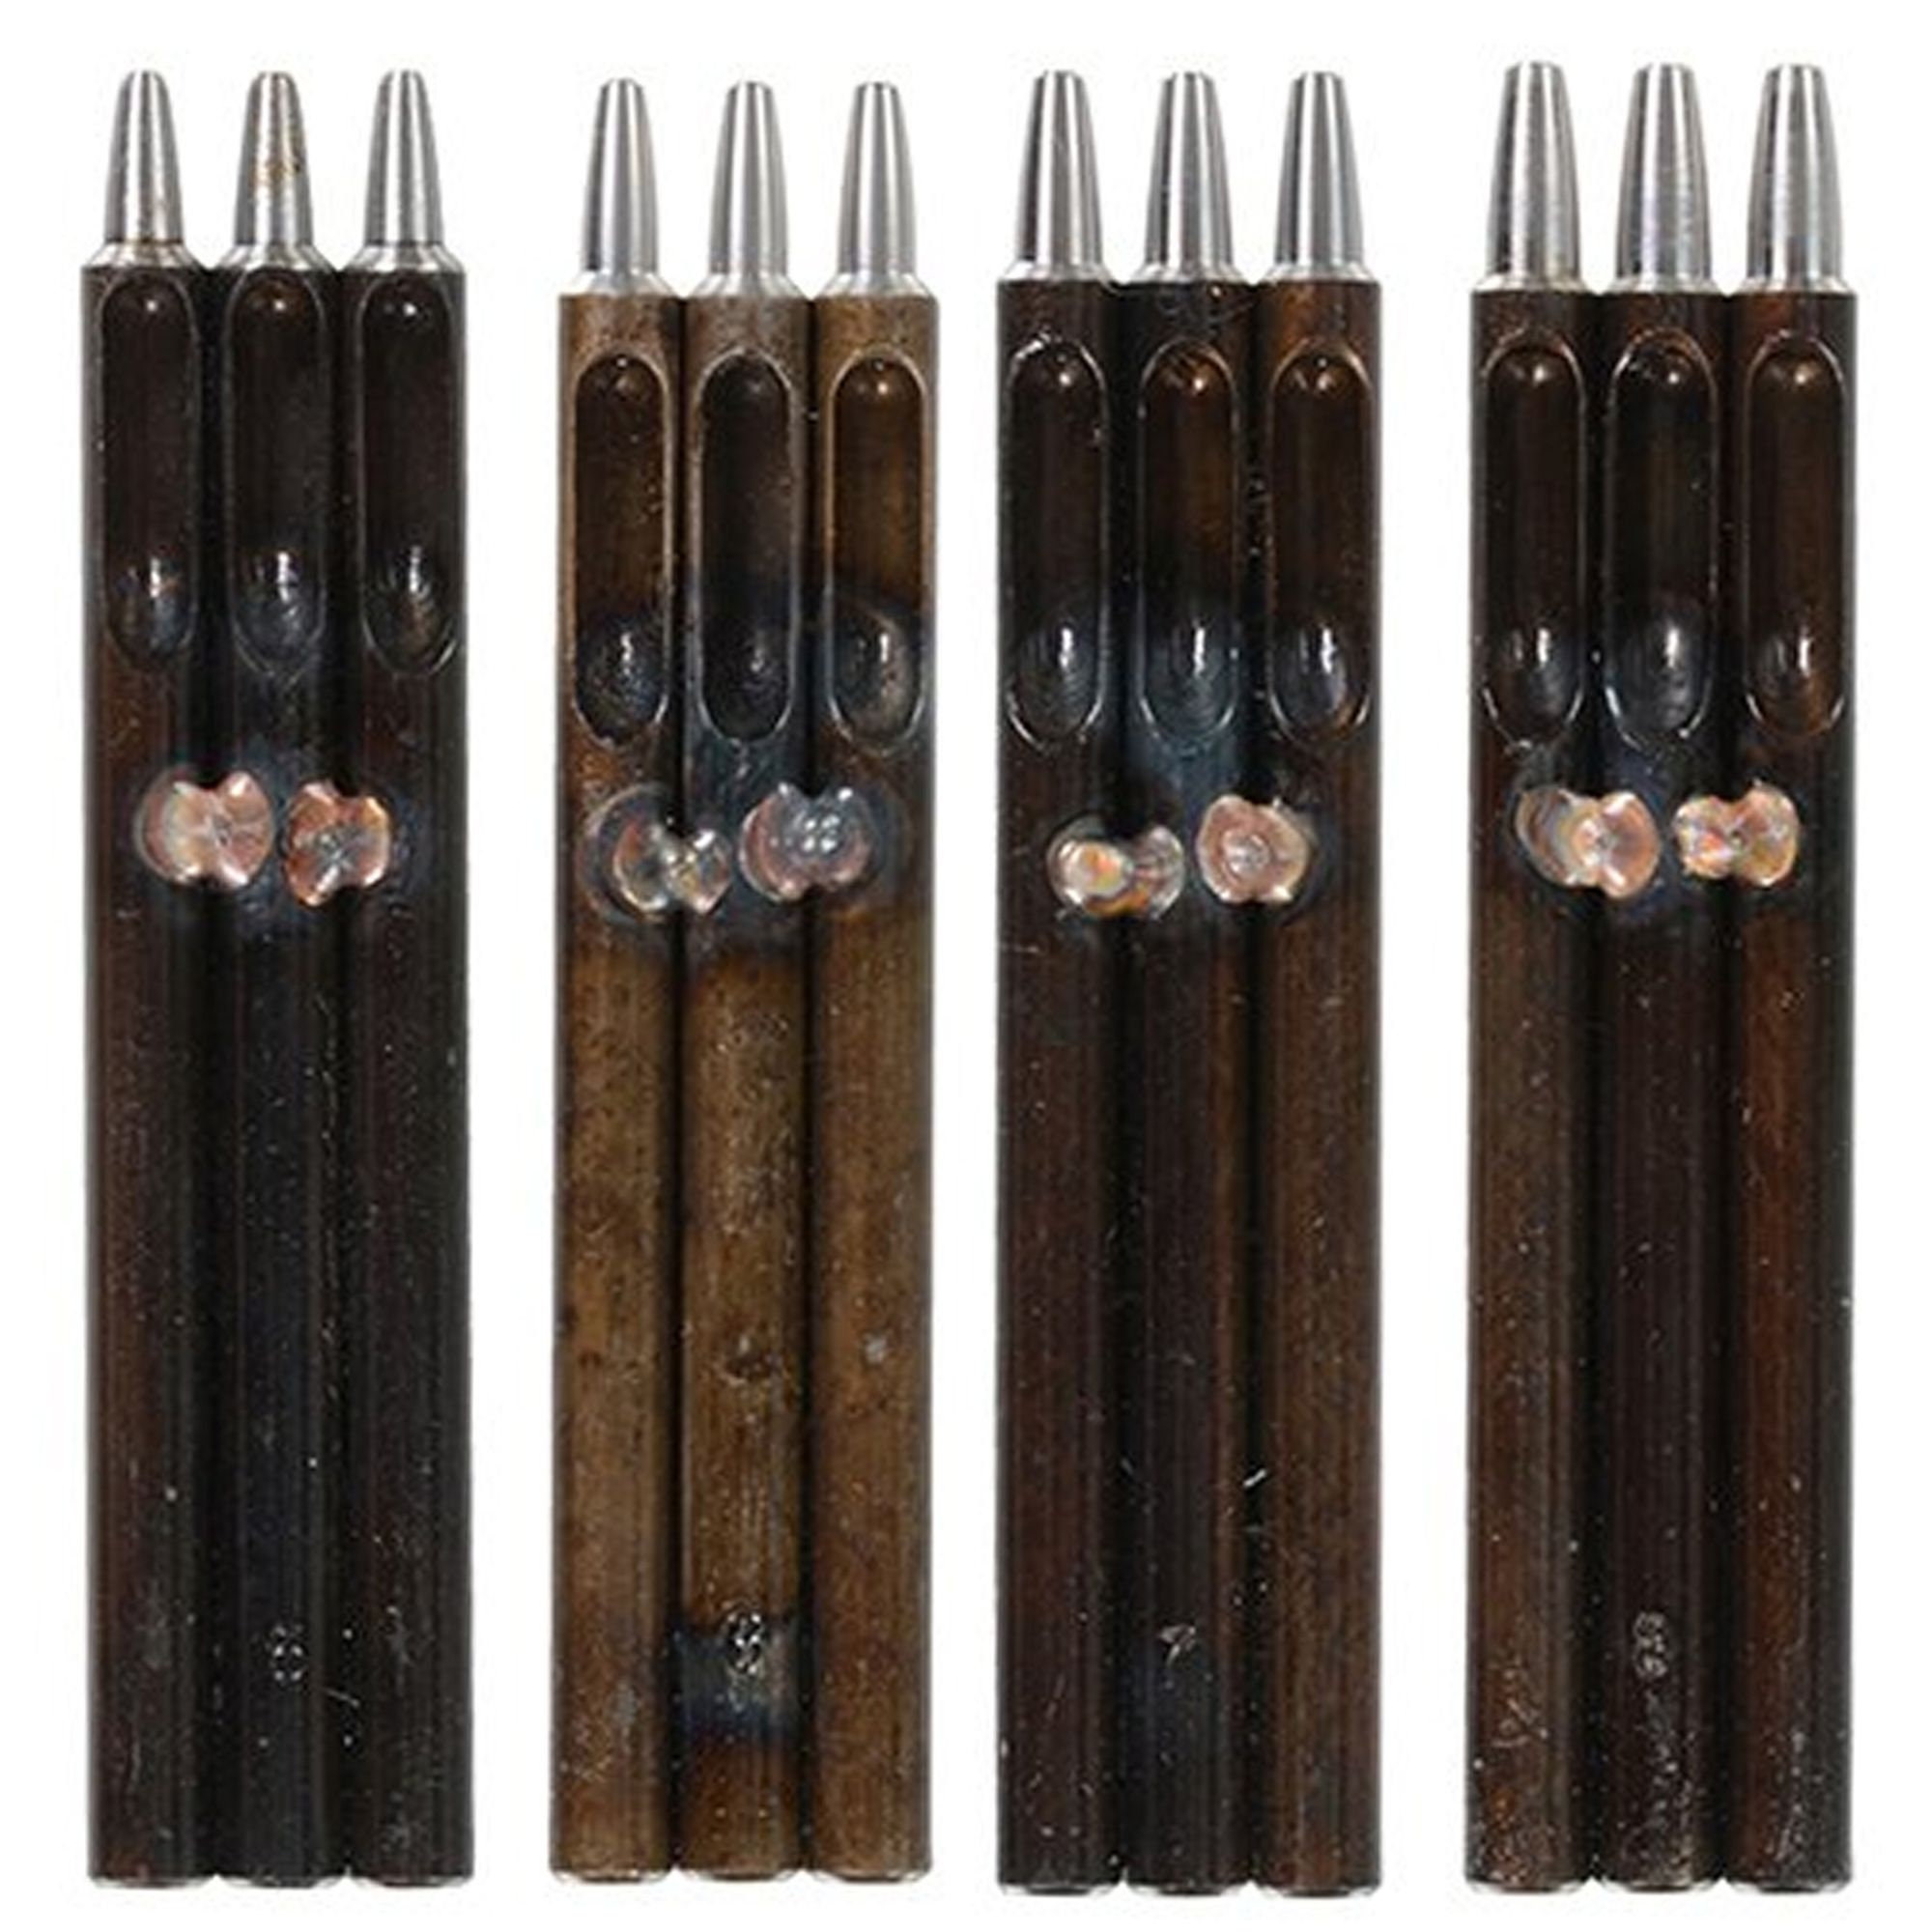 Suncraft Maruichi Wood Carving Woodblock Printing Tool Set, with